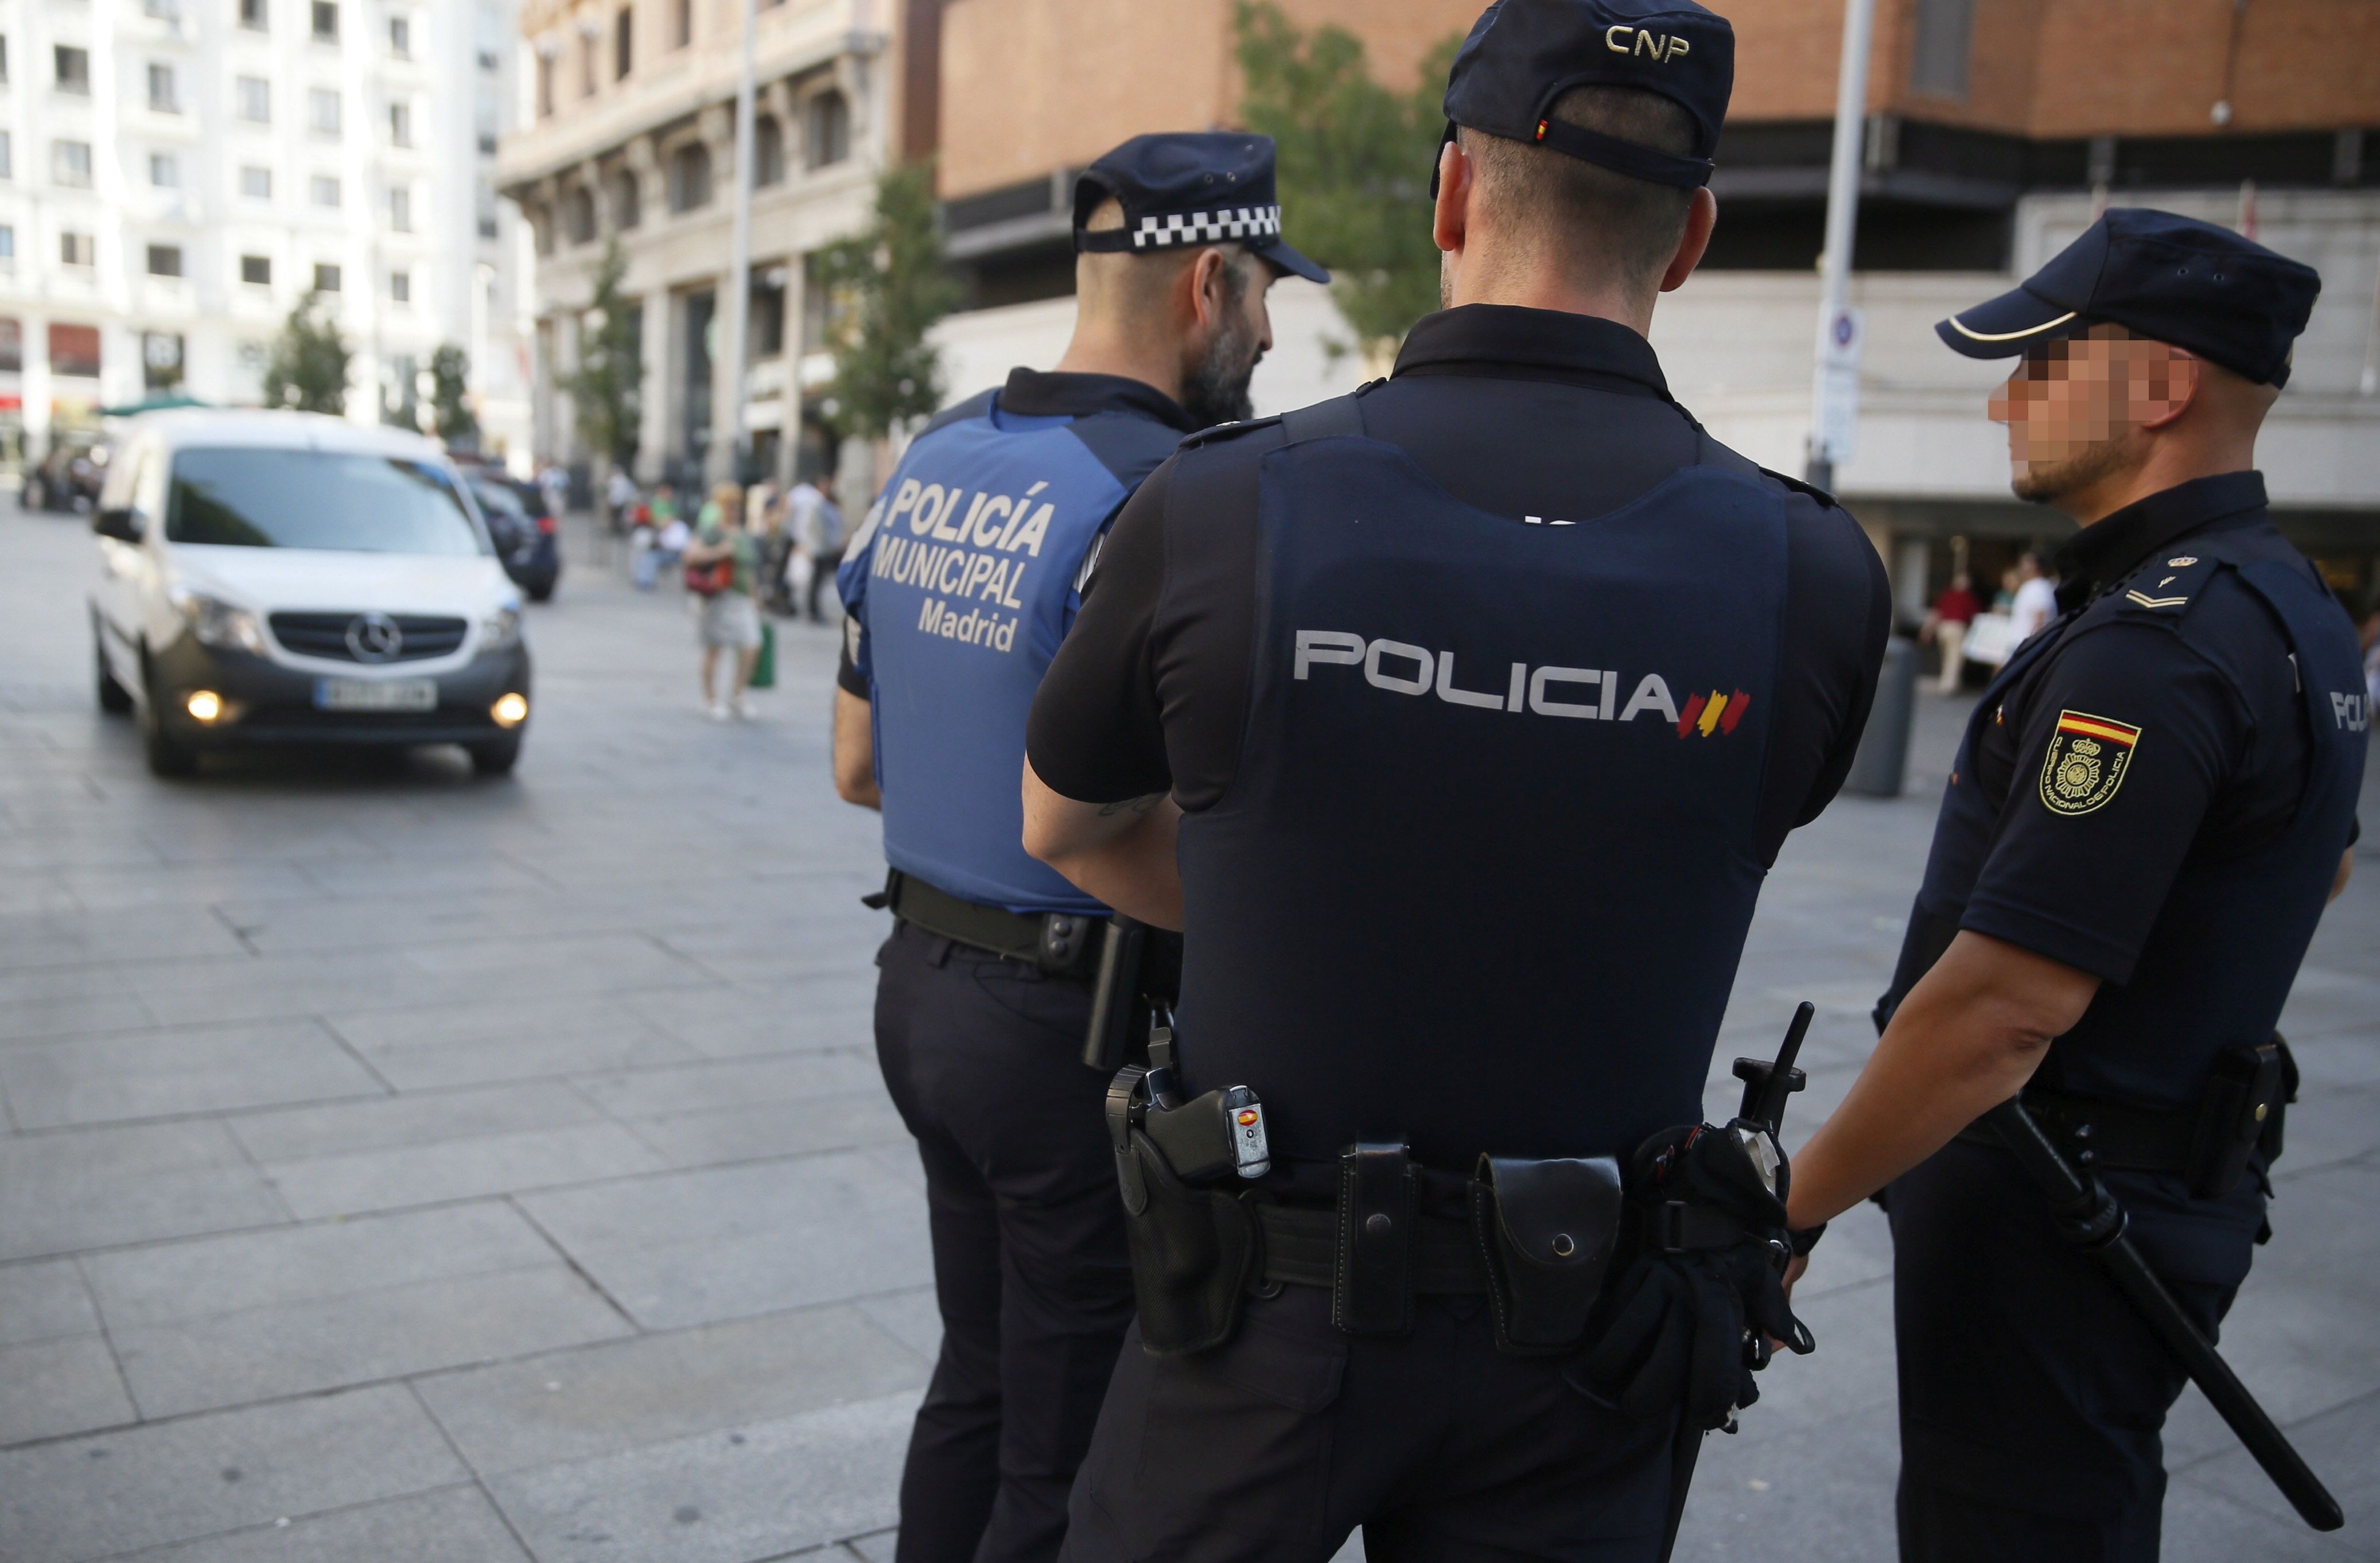 epa06149618 Spanish policemen stand guard in Callao square in downtown Madrid, Spain, 18 August 2017, as a security measure on the day after terrorist attacks committed in Catalonian cities of Barcelona and Cambrils. According to media reports, at least 13 people have died and 100 were injured when a van crashed into pedestrians in Las Ramblas in Barcelona in an incident which Spanish police are treating as a terror attack. A similar attack was conducted in the coastal city of Cambrils, where five alleged terrorists, who apparently wore bomb belts, were shot dead by security forces on early morning 18 August after they attacked pedestrians using a vehicle next to a promenade, injuring seven people, including a police officer. Police have stated that the attack in Barcelona and the attack in Cambrils were linked. The so-called 'Islamic State' (IS) has claimed responsibility for the attack in Barcelona.  EPA/MARISCAL